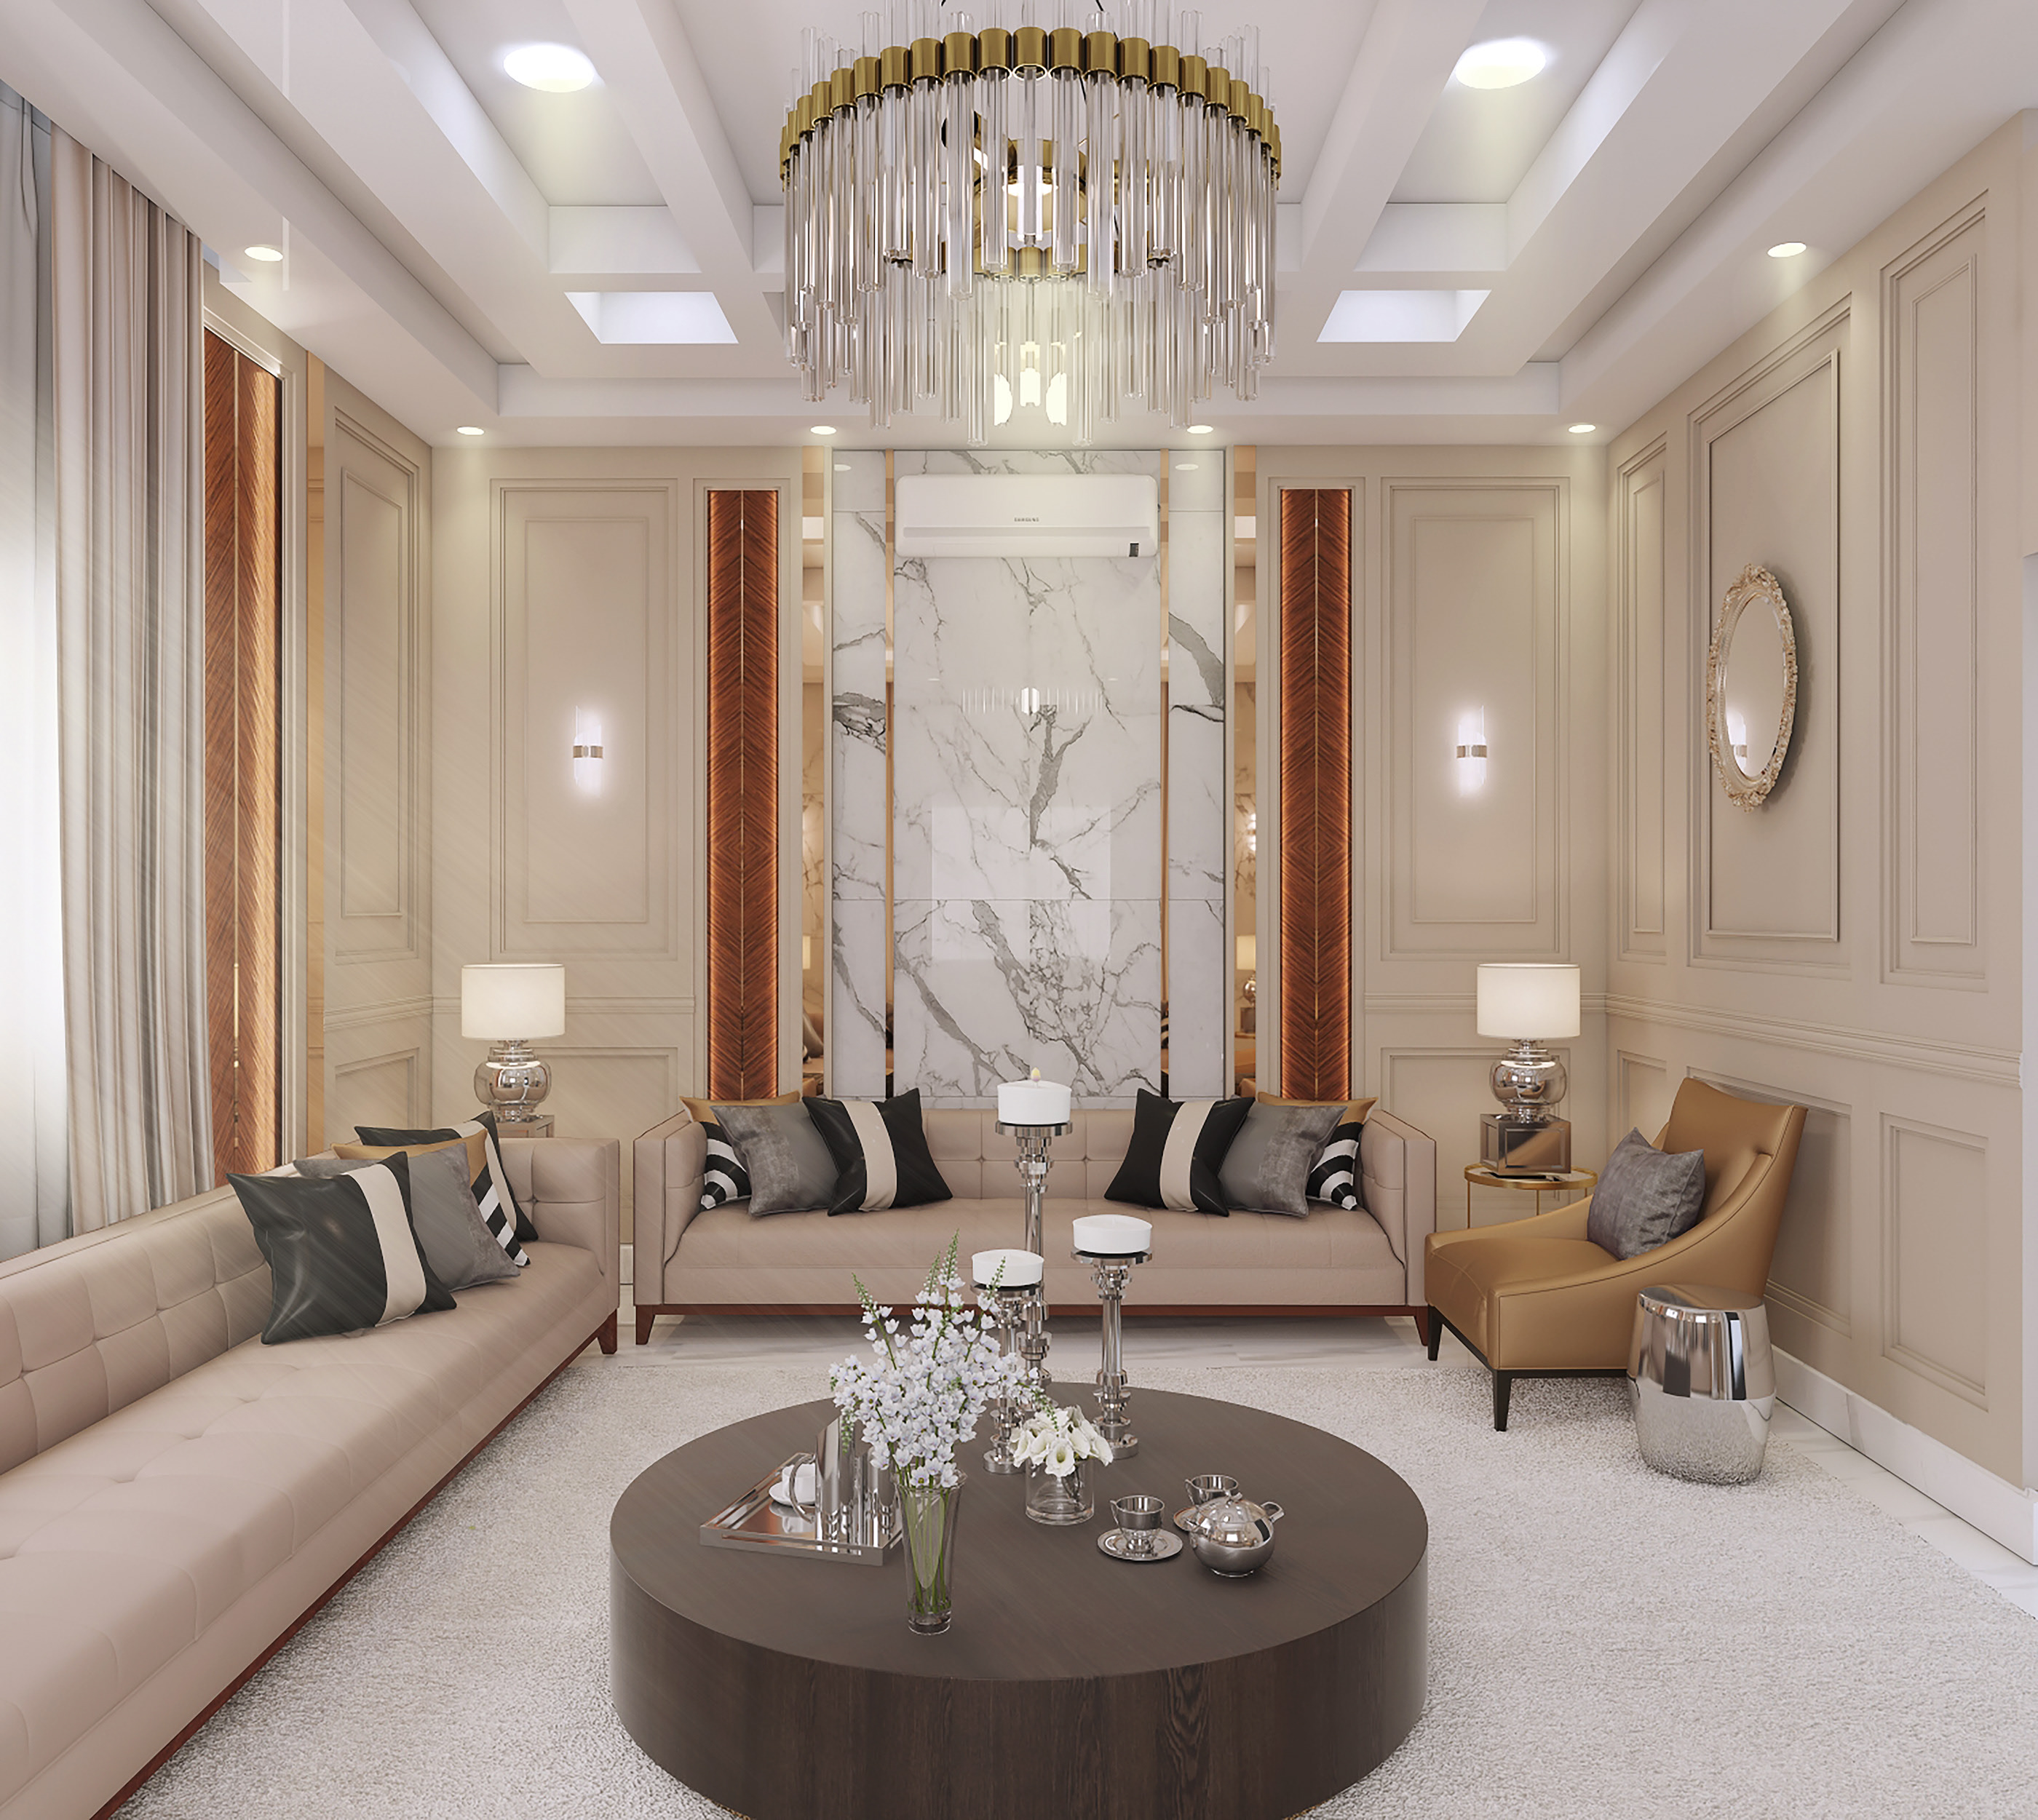 Neo-Classic majles on Behance